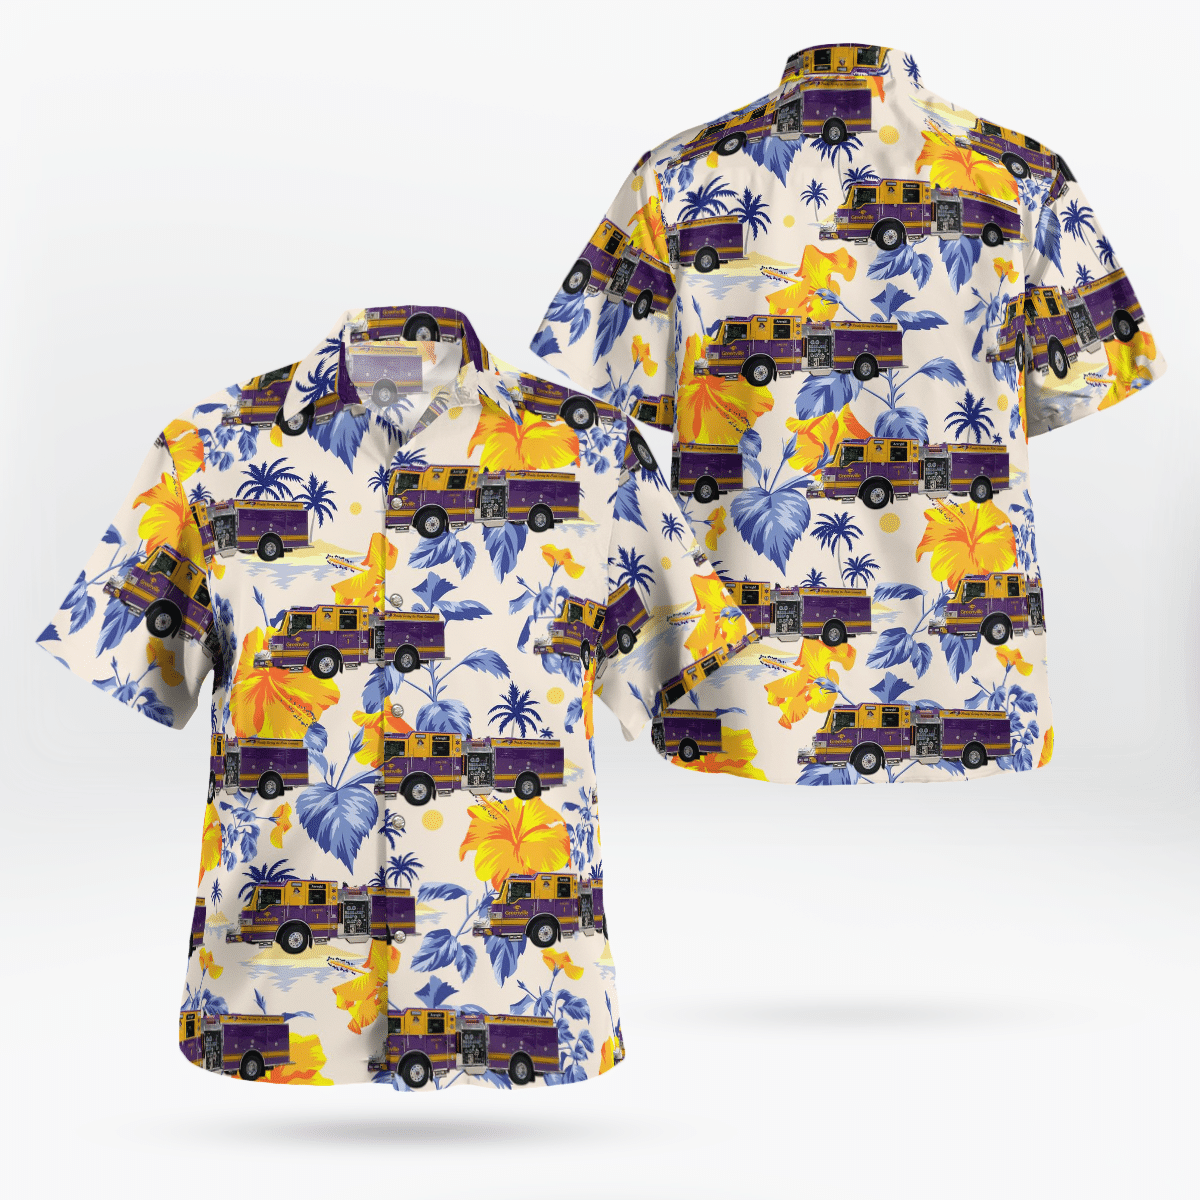 This Hawaiian Shirt Is A Great Way To Add A Splash Of Color To Your Wardrobe Word2